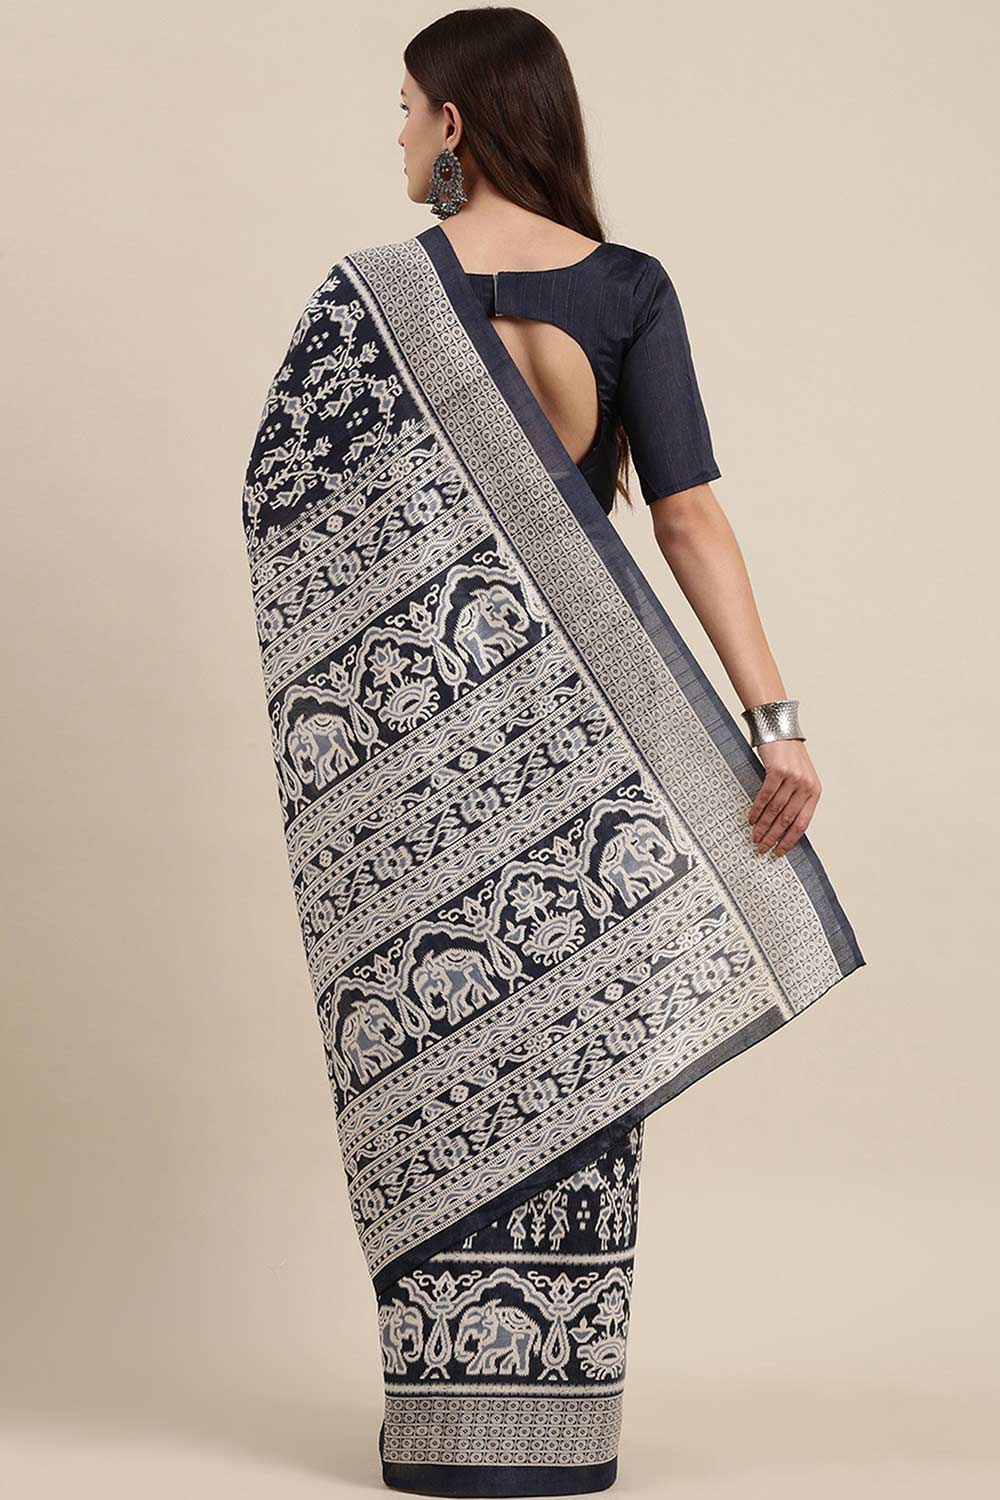 Shop Lori Bhagalpuri Silk Navy Blue Printed One Minute Saree at best offer at our  Store - One Minute Saree